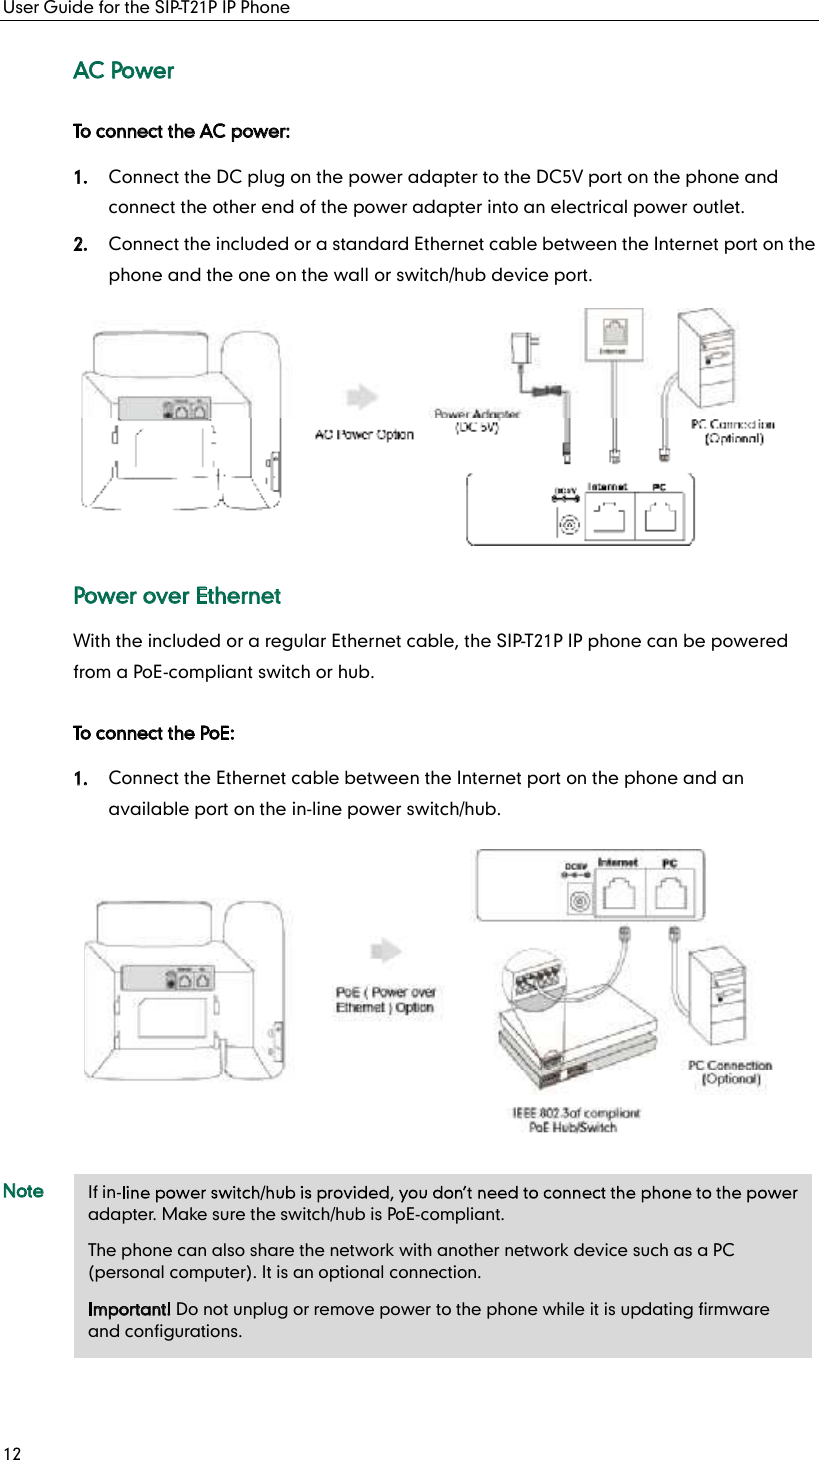 User Guide for the SIP-T21P IP Phone 12 AC Power To connect the AC power: 1. Connect the DC plug on the power adapter to the DC5V port on the phone and connect the other end of the power adapter into an electrical power outlet. 2. Connect the included or a standard Ethernet cable between the Internet port on the phone and the one on the wall or switch/hub device port.  Power over Ethernet With the included or a regular Ethernet cable, the SIP-T21P IP phone can be powered from a PoE-compliant switch or hub. To connect the PoE: 1. Connect the Ethernet cable between the Internet port on the phone and an available port on the in-line power switch/hub.  Note If in-adapter. Make sure the switch/hub is PoE-compliant. The phone can also share the network with another network device such as a PC (personal computer). It is an optional connection. Important! Do not unplug or remove power to the phone while it is updating firmware and configurations. 